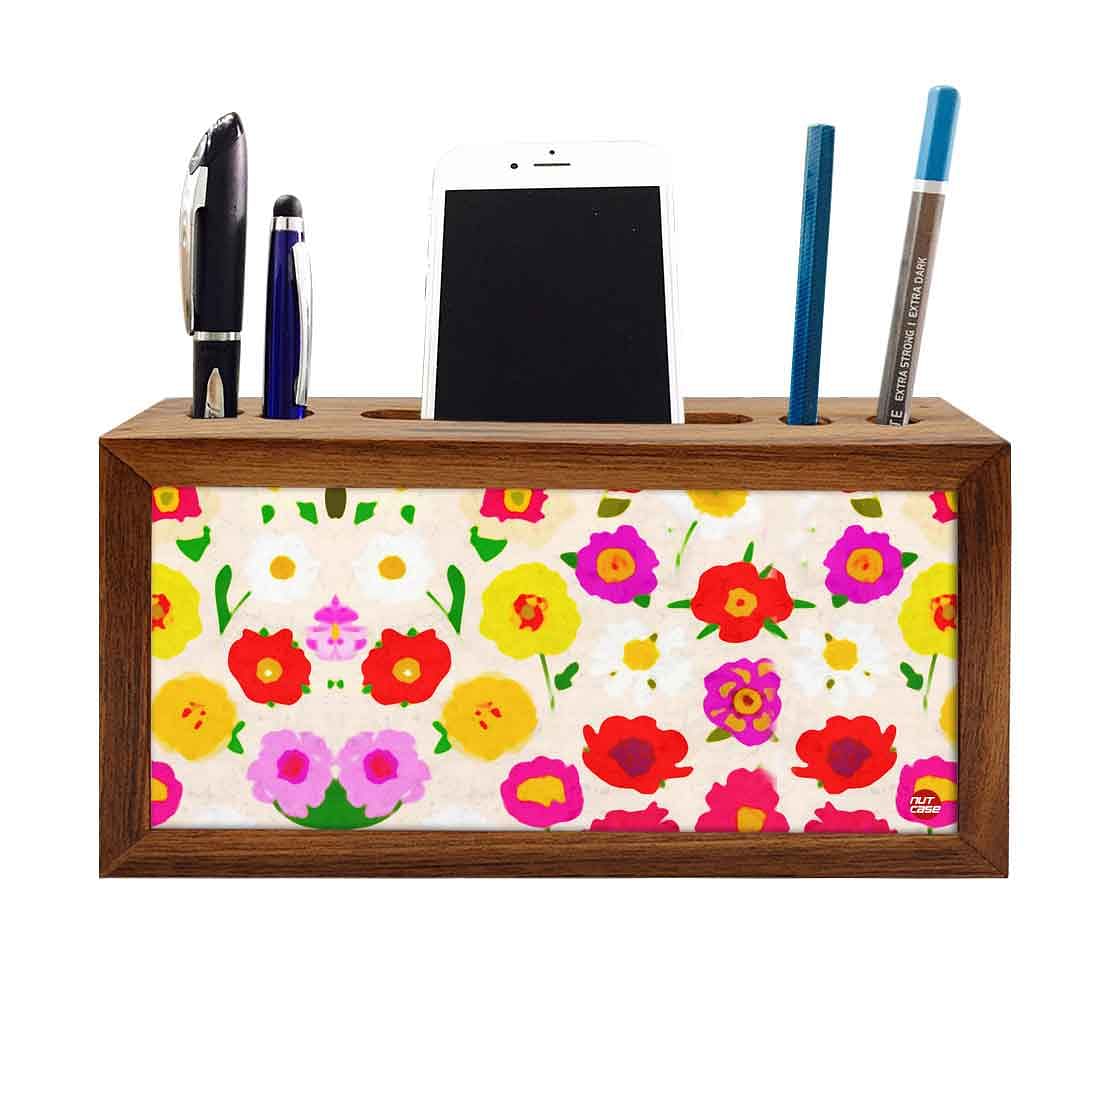 Wooden Table Organizer Pen Mobile Stand - Pretty Little Flowers Nutcase